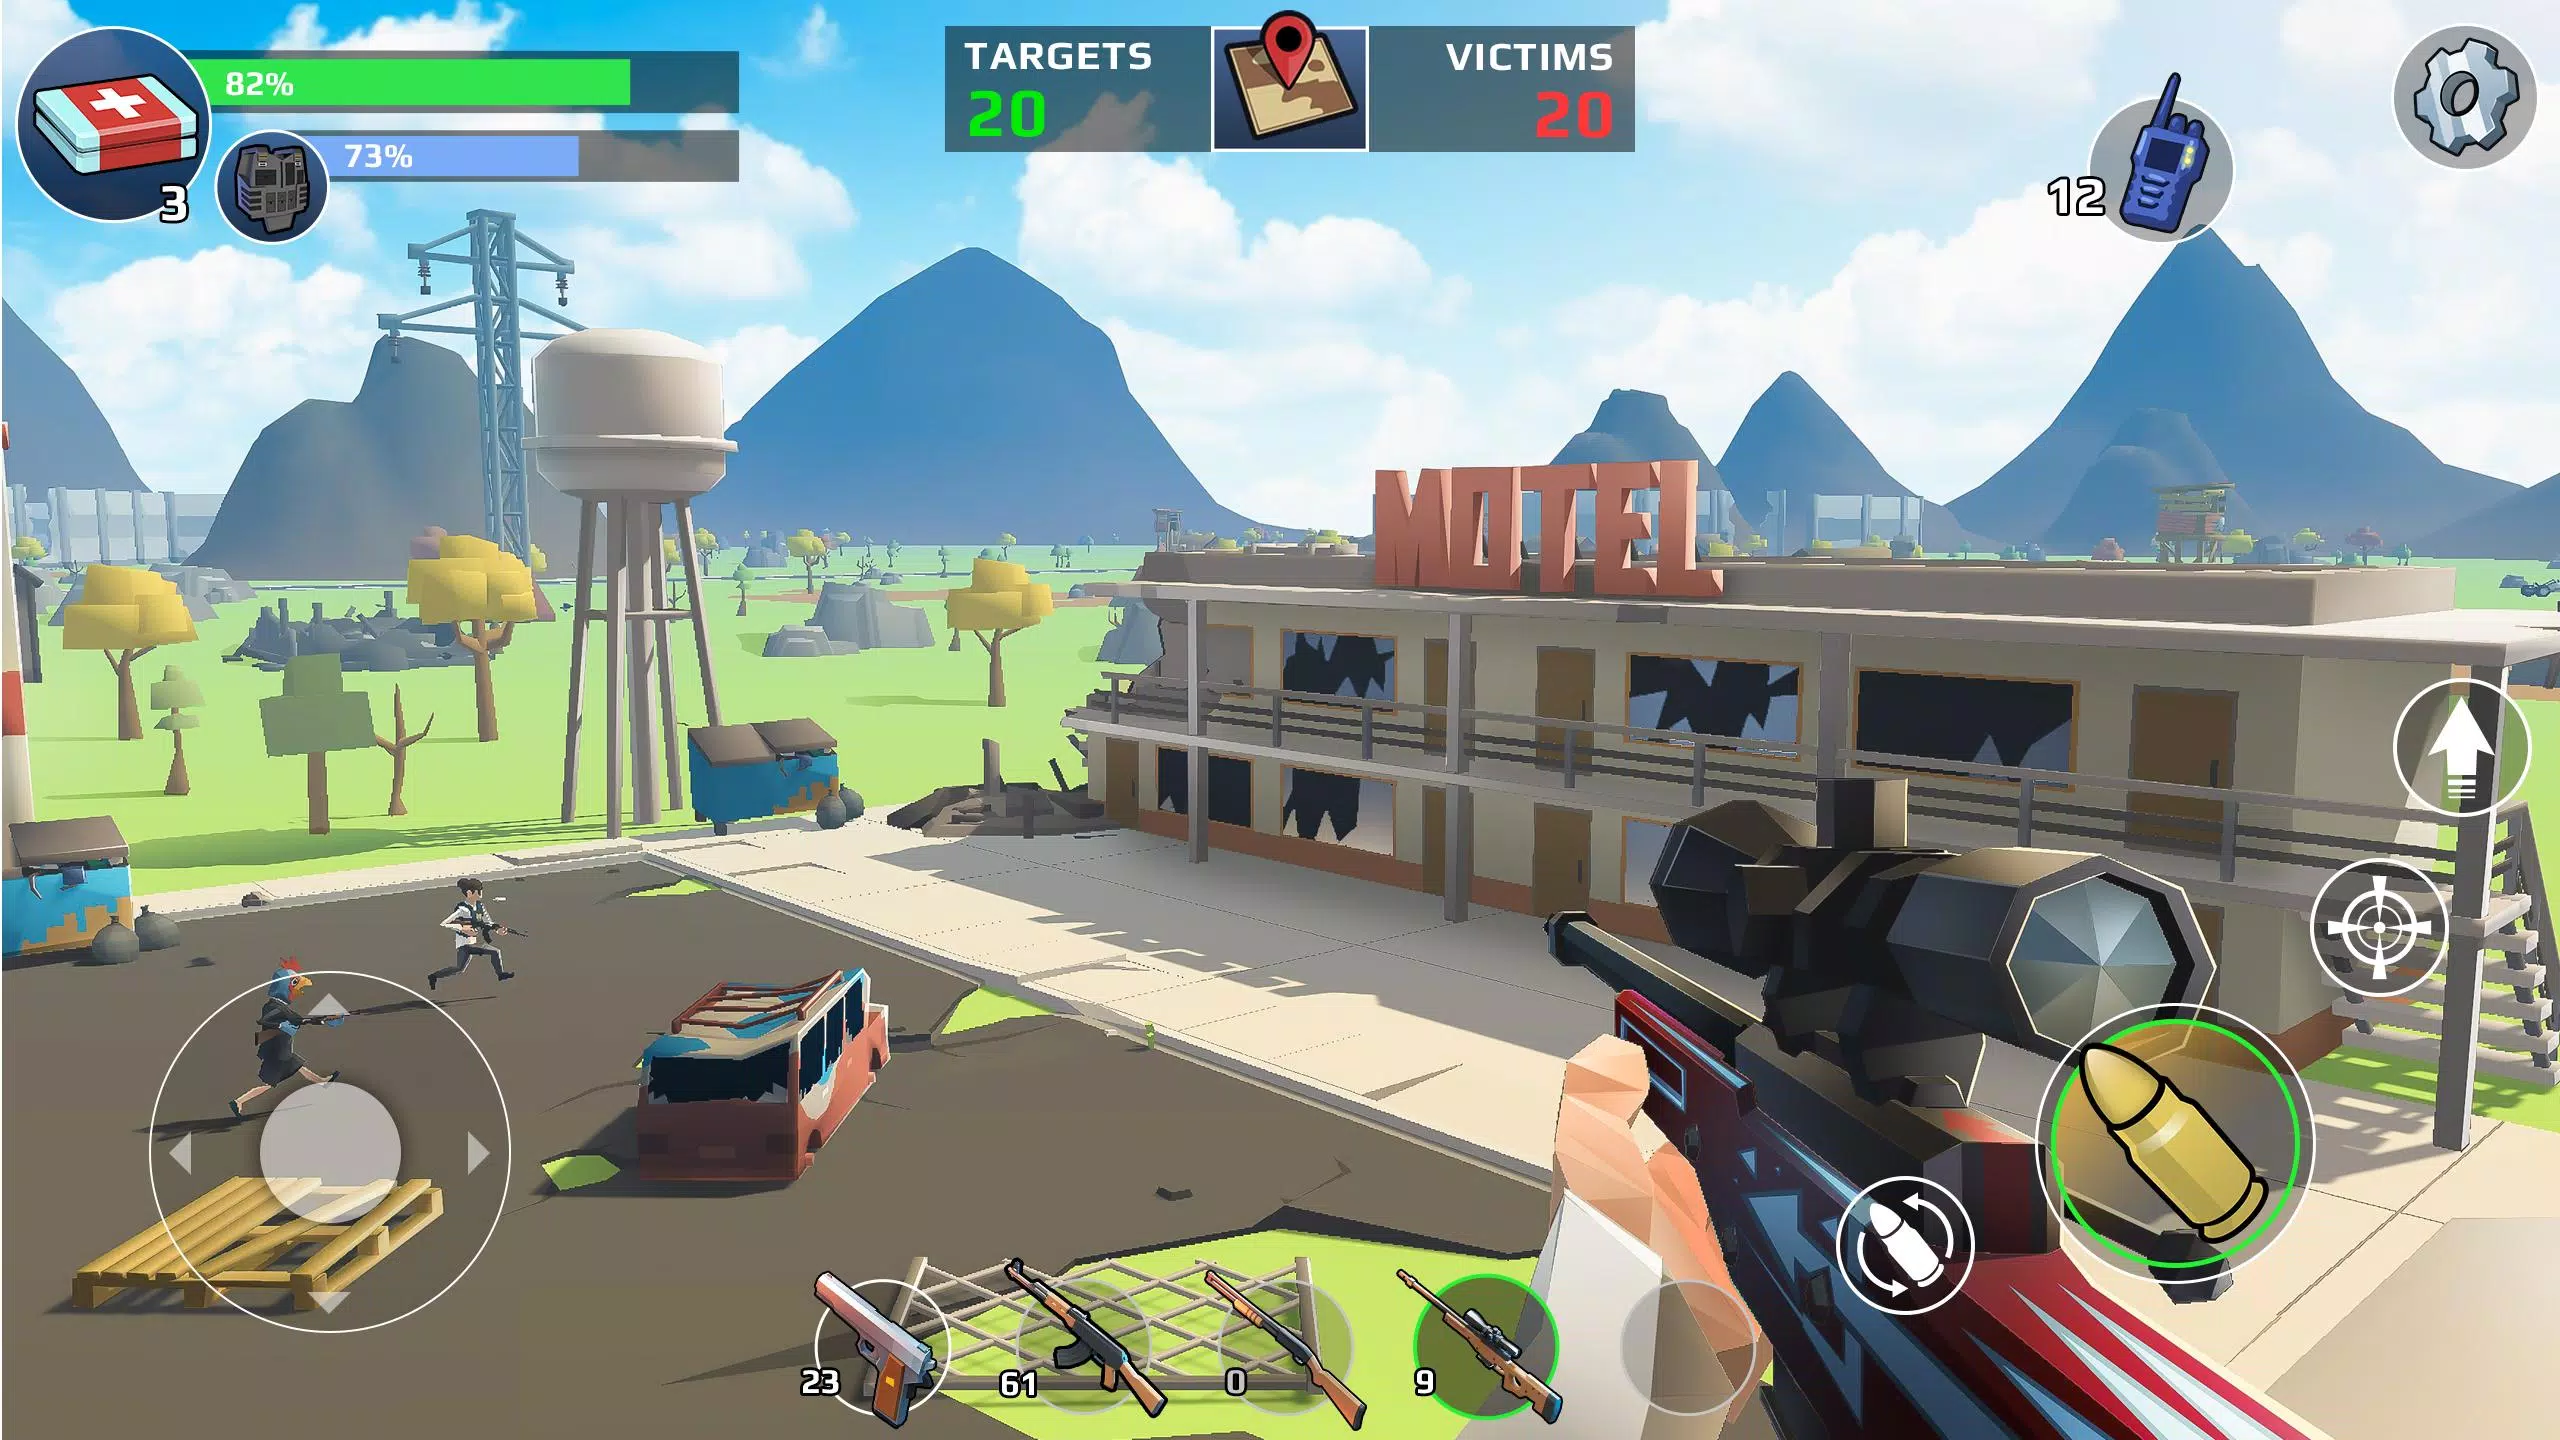 Battlefield Royale - The One APK Download for Android Free